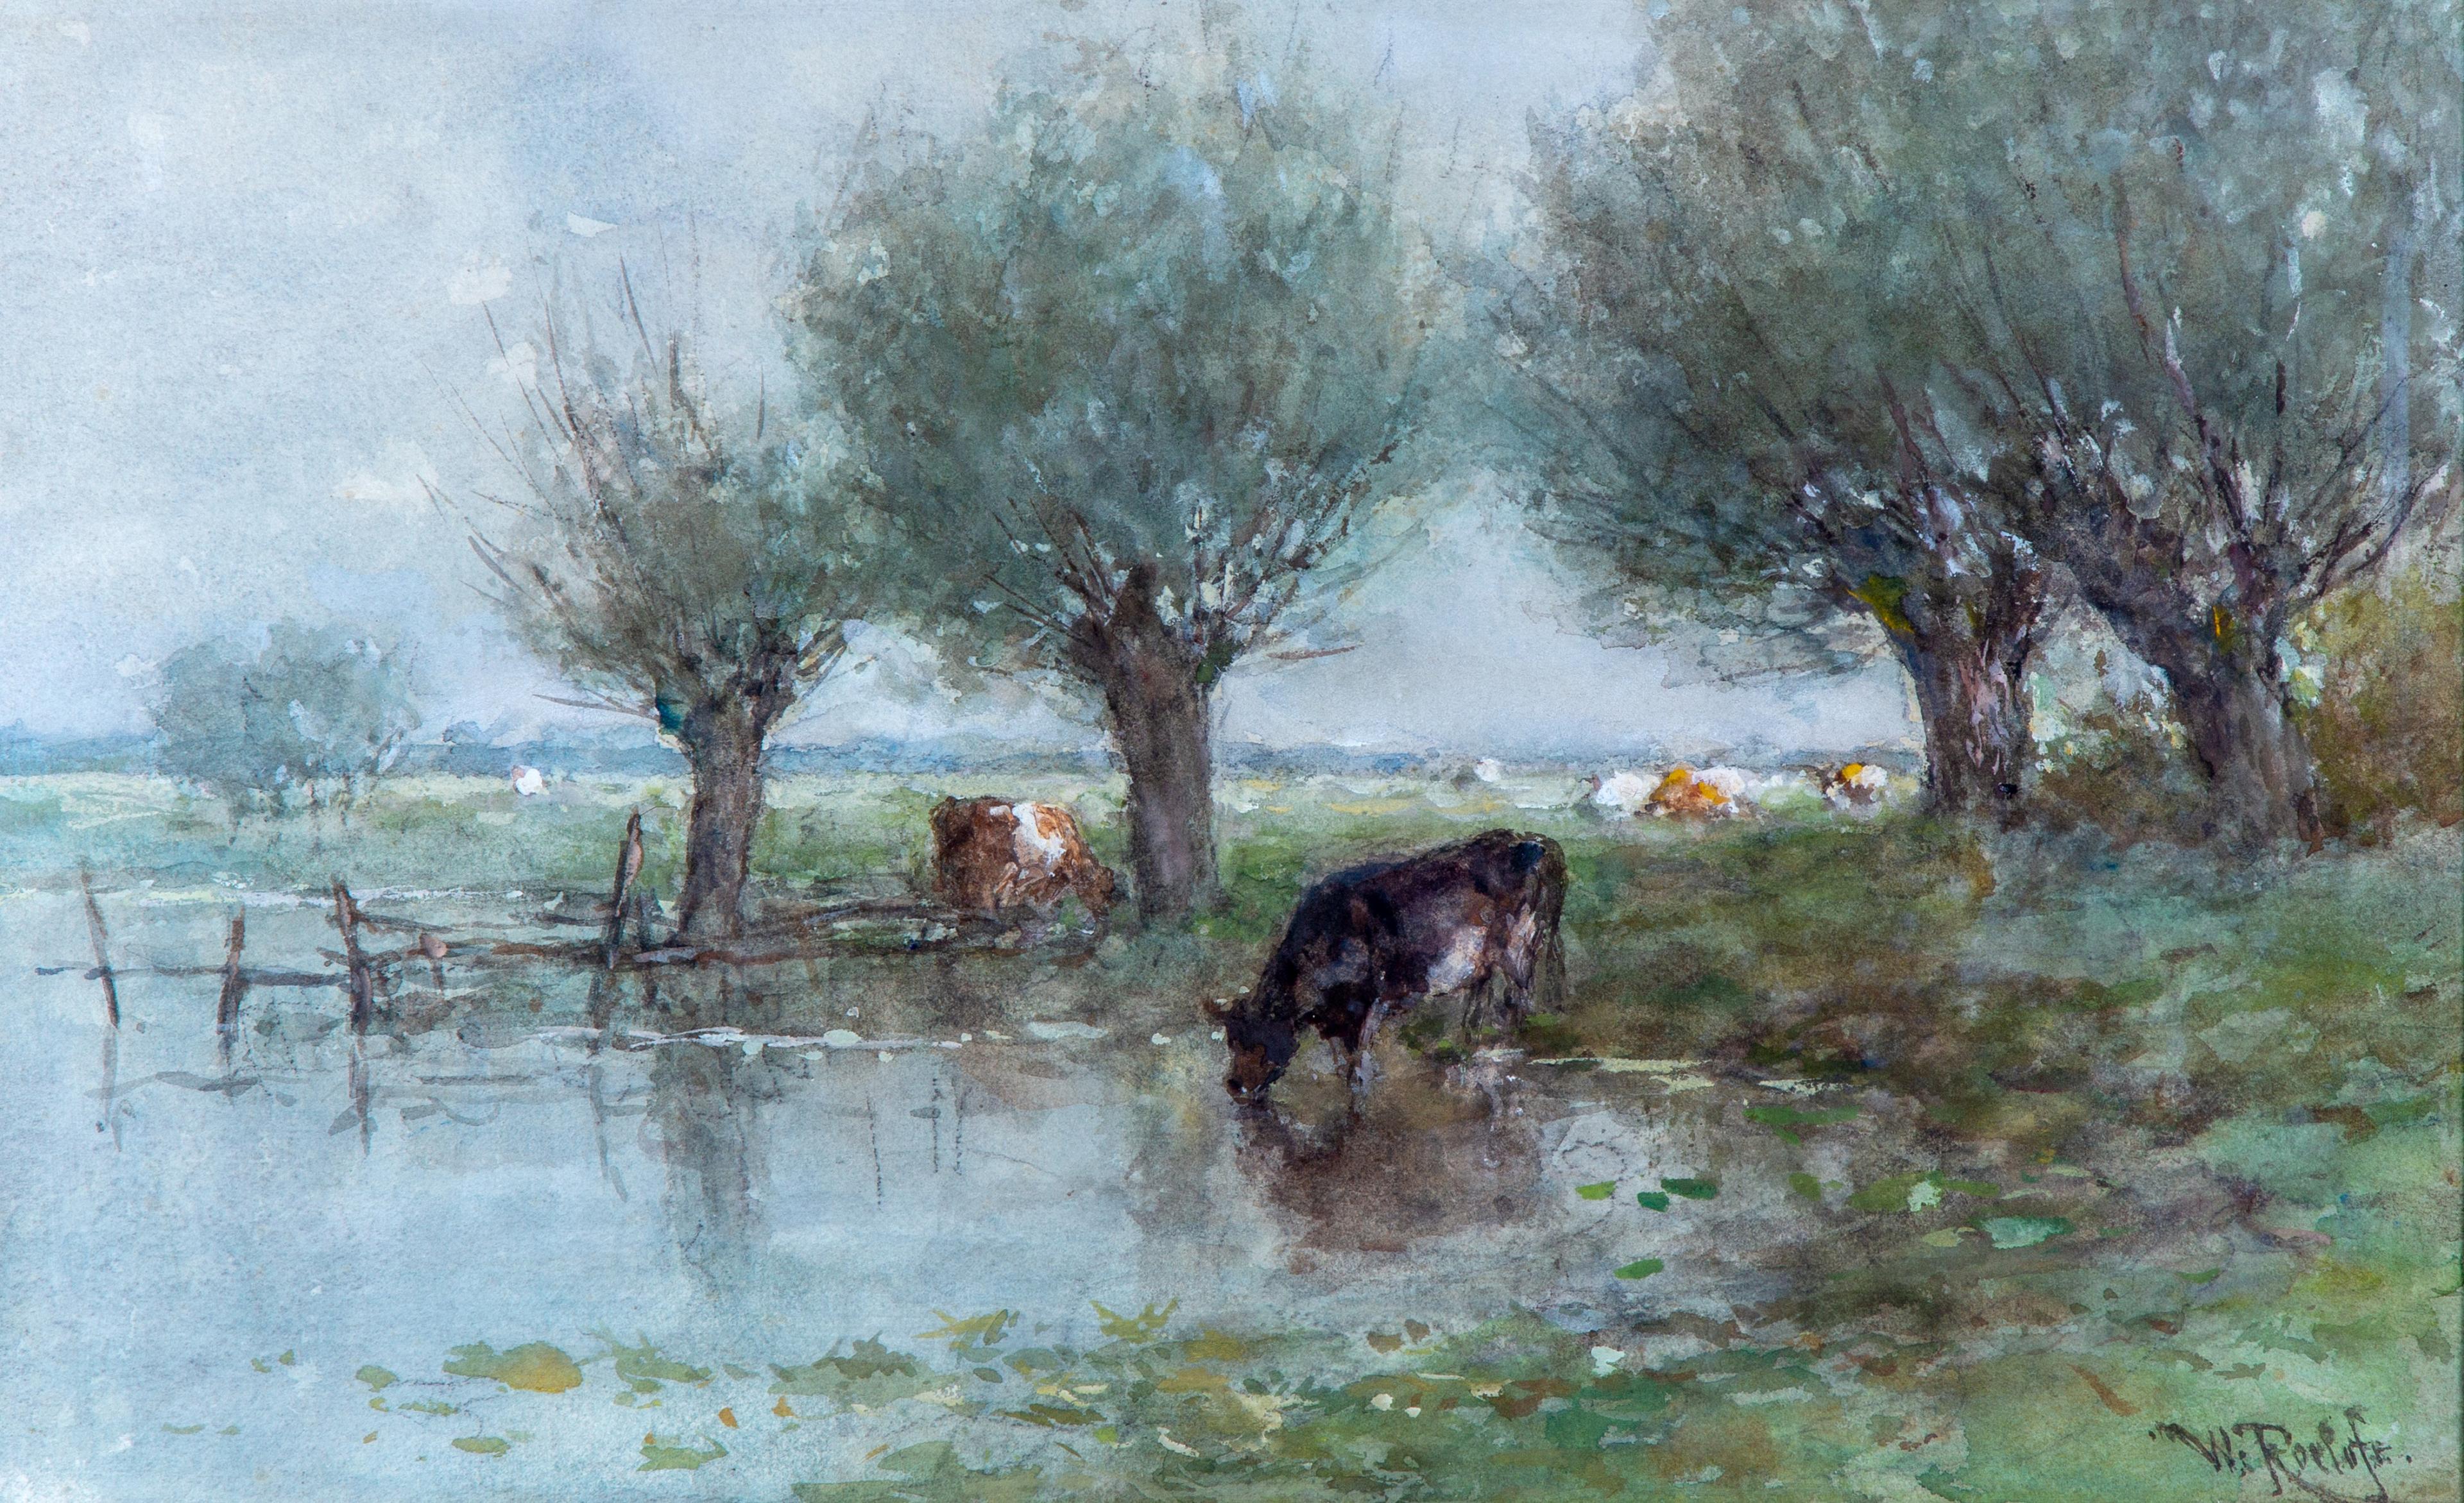 A drinking cow in a polder landscape